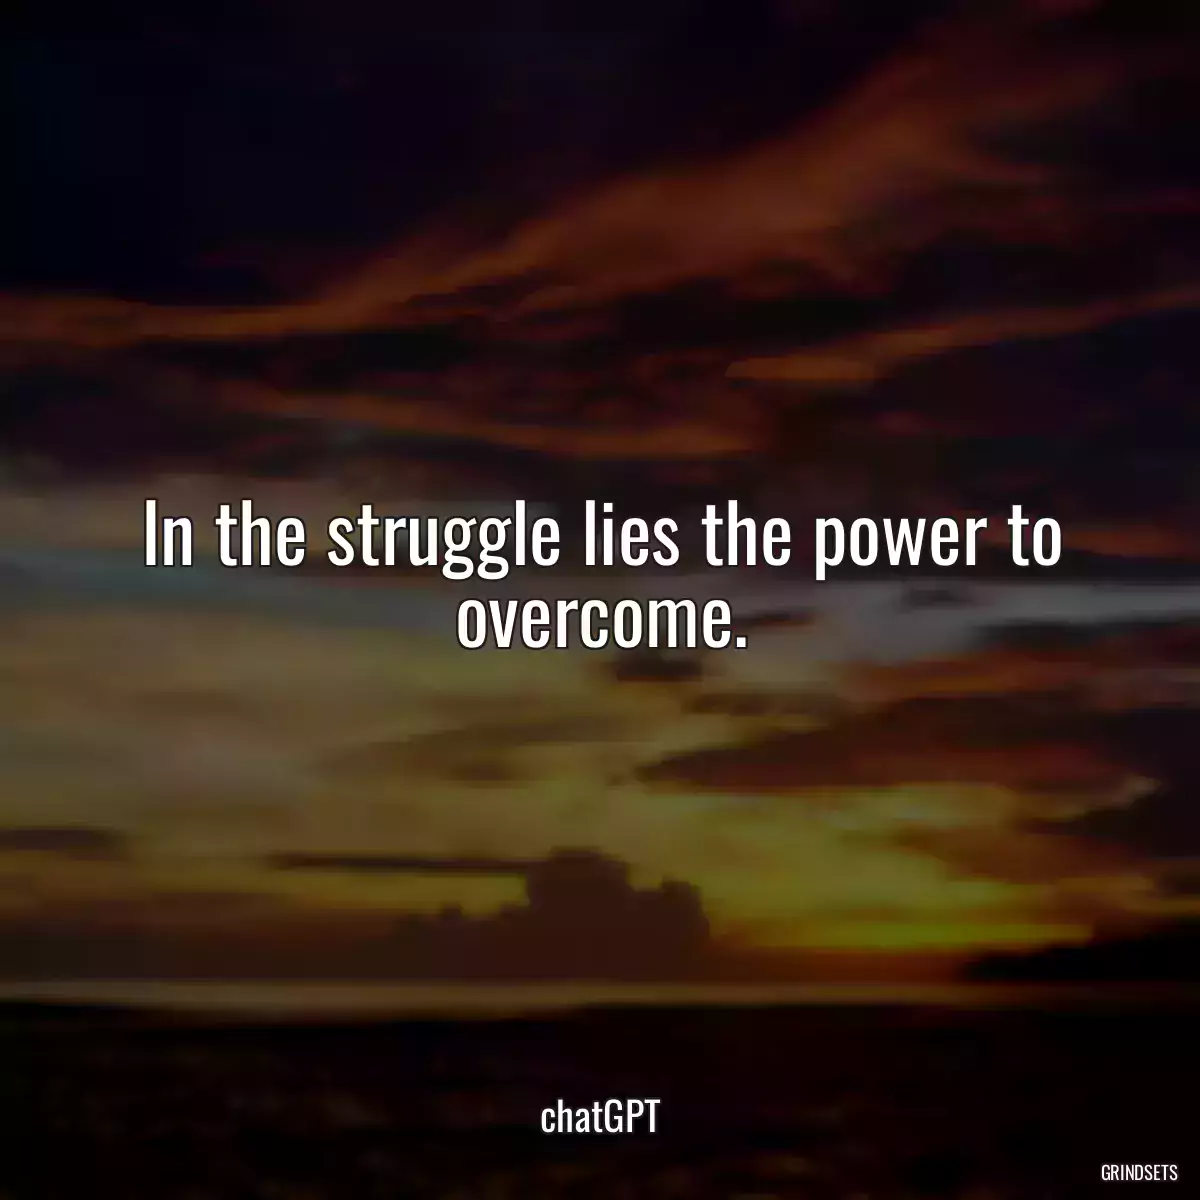 In the struggle lies the power to overcome.